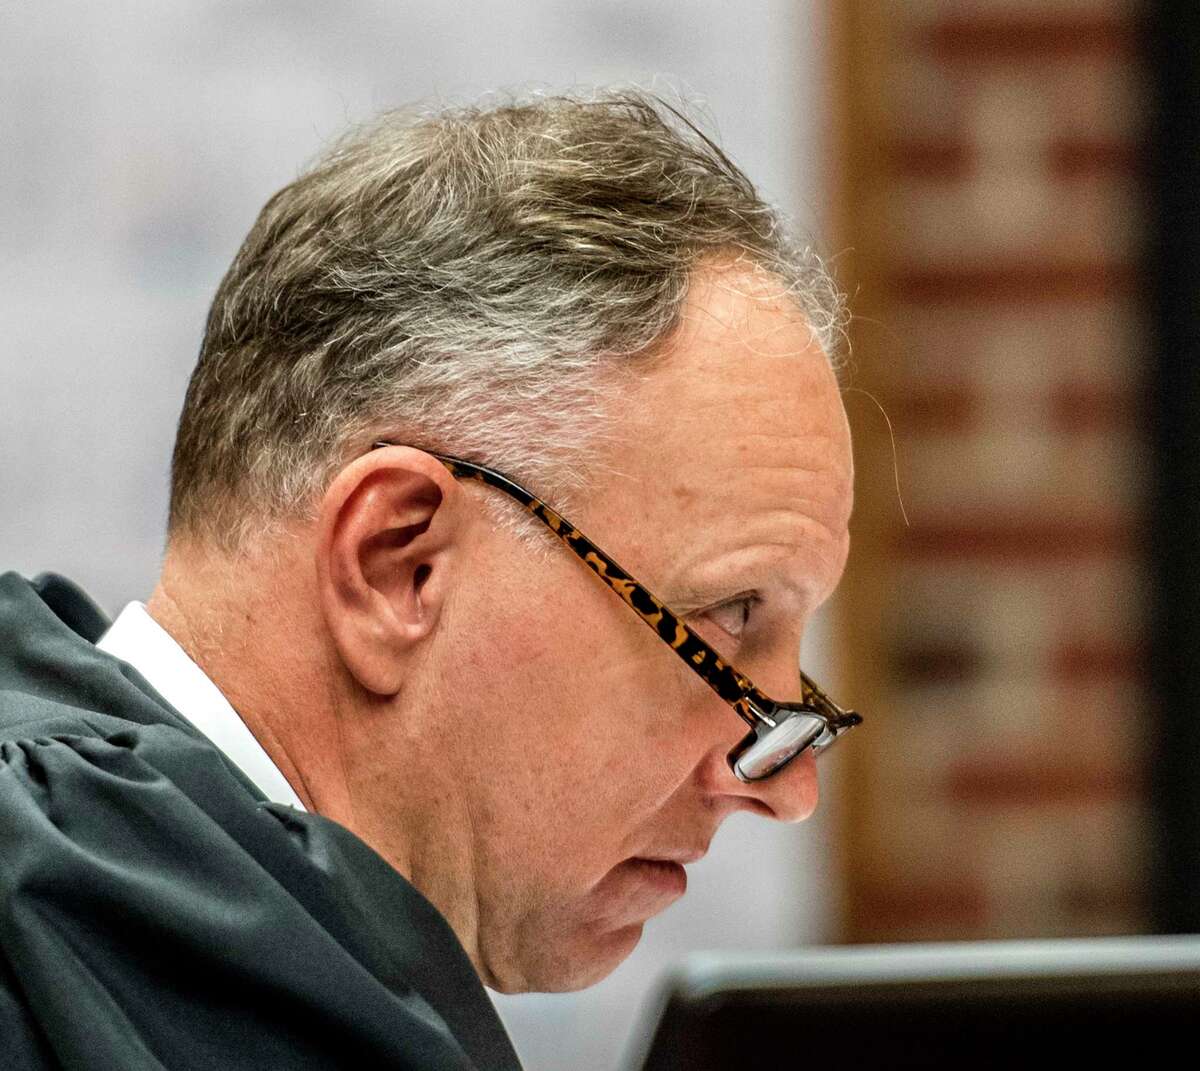 Saratoga County Court Judge James Murphy in court on Tuesday June 19, 2018 in Ballston Spa, N.Y. (Skip Dickstein/Times Union)